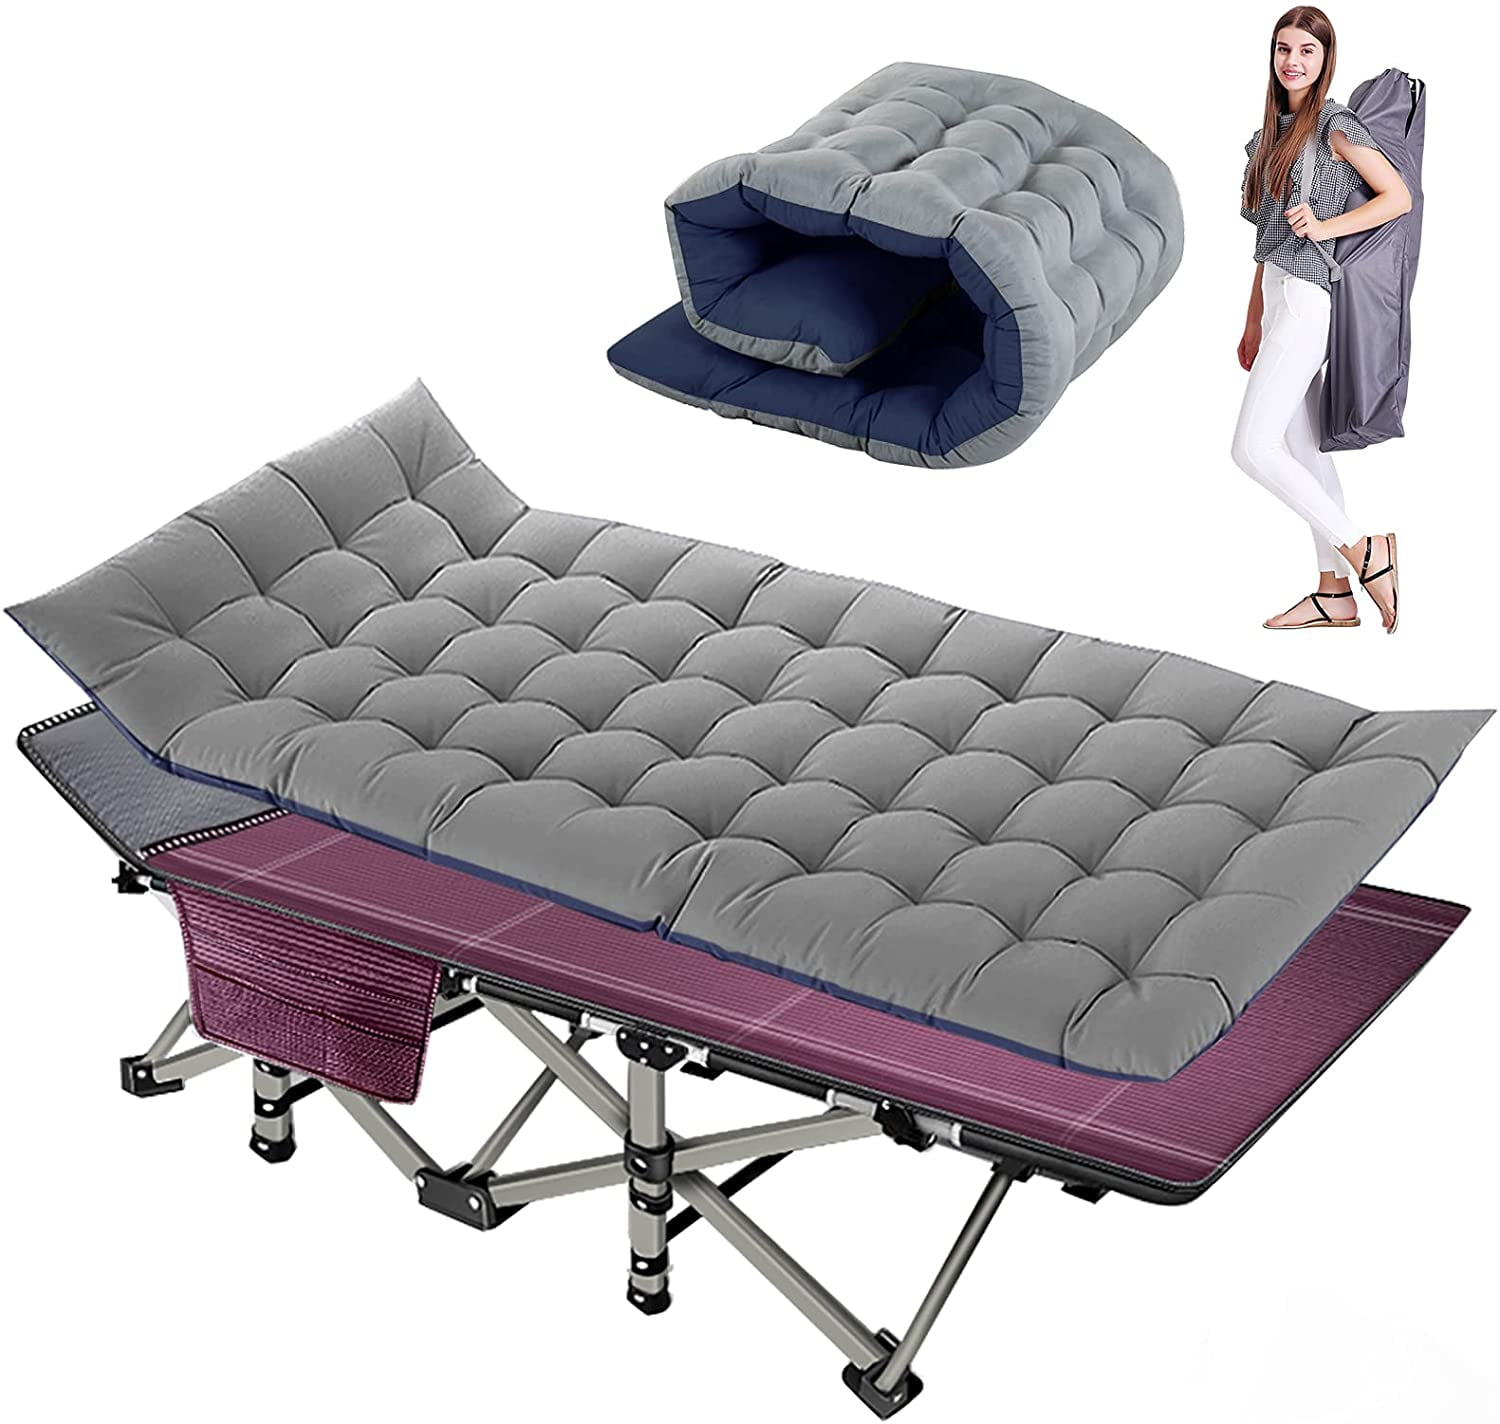 Fitted Camping Cot Sheet for Adult Sleeping Cots Travel cots and Folding Cots Keeps Your Sleeping Pad Secure! Camping Bedding That fits Most Army cots Military cots 